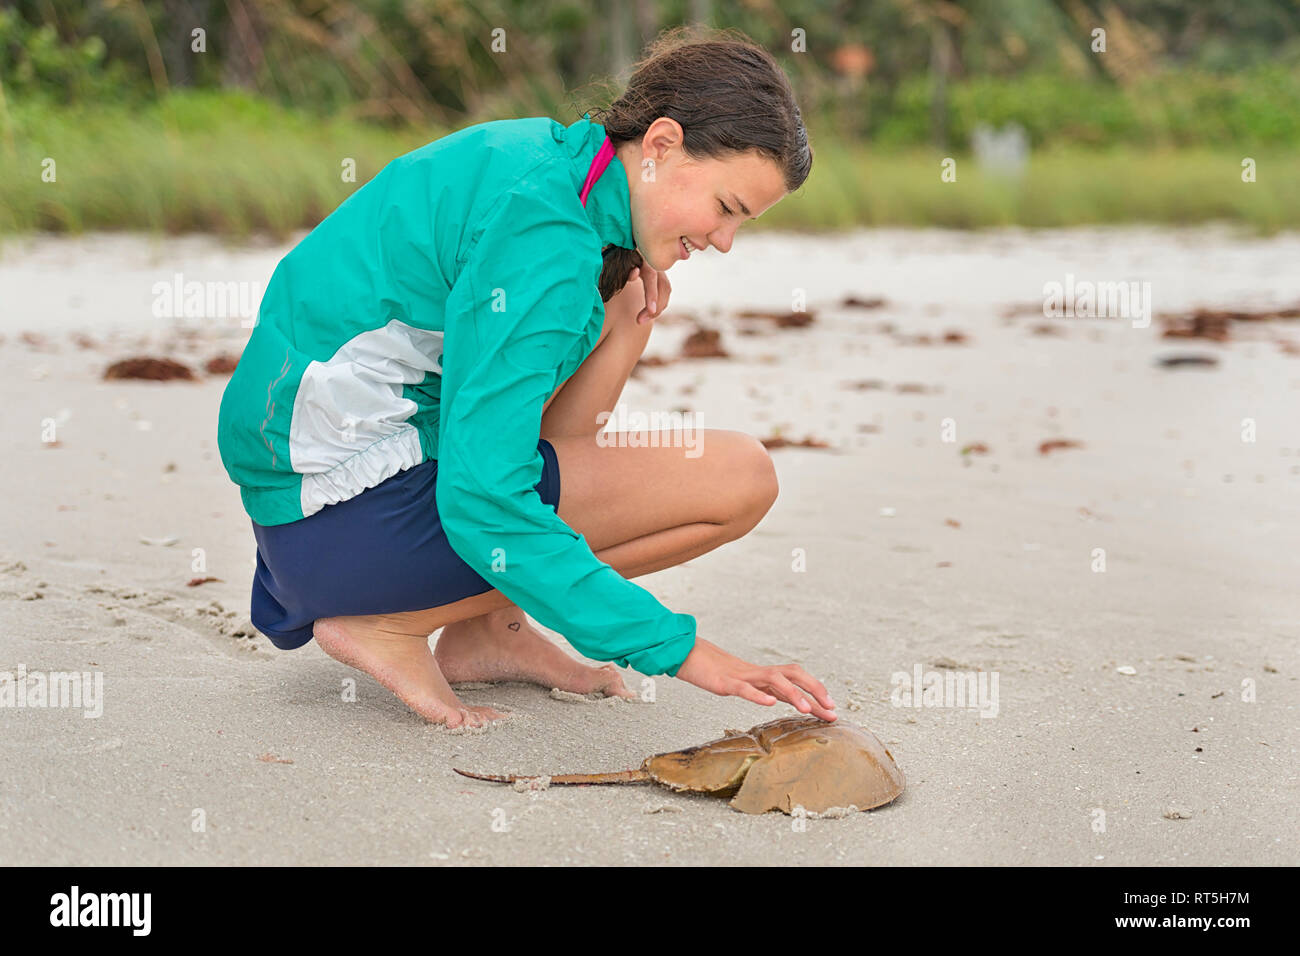 United States of America, Florida,  DSC0423 Naples, Naples, barefooted girl touches a carcass of a horseshoe crab (Limulidae) on Naples beach Stock Photo